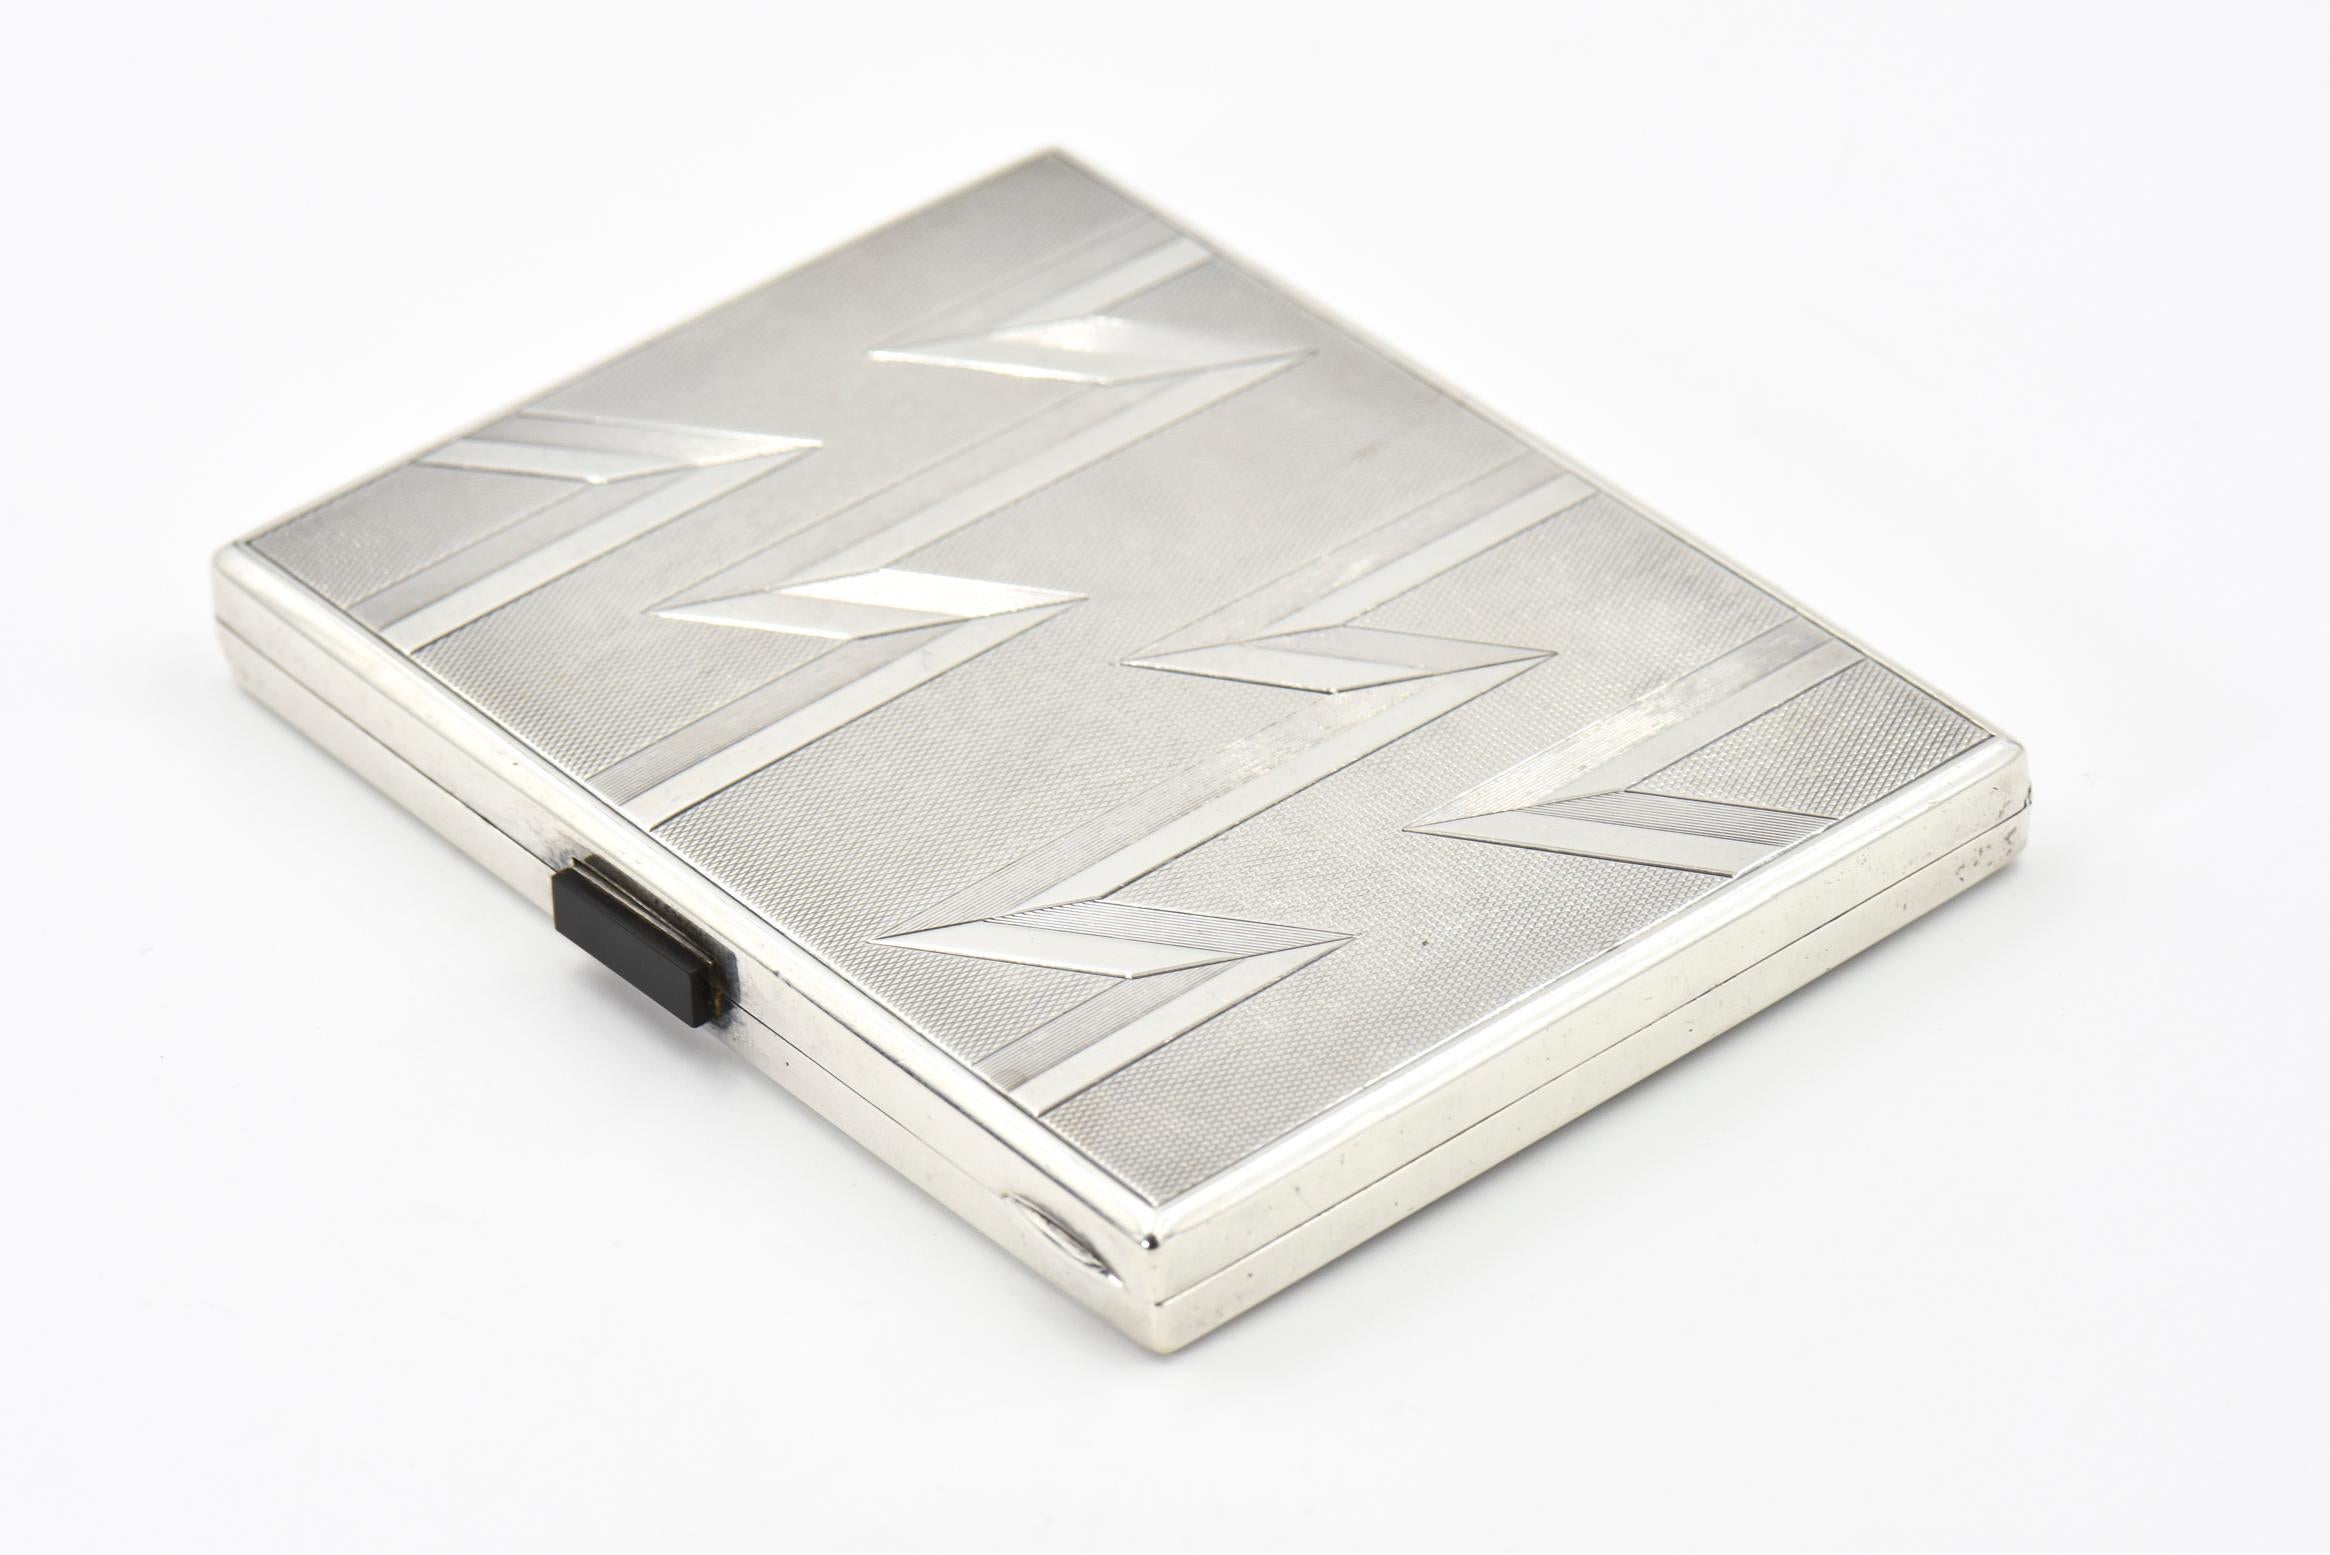 Stunning Art Deco cigarette case featuring a geometric lightning design on an engine turned 900 silver case. To open the case you push down on the onyx bar. It is marked 900 silver and has another mark that I can not read. It might be Austrian or